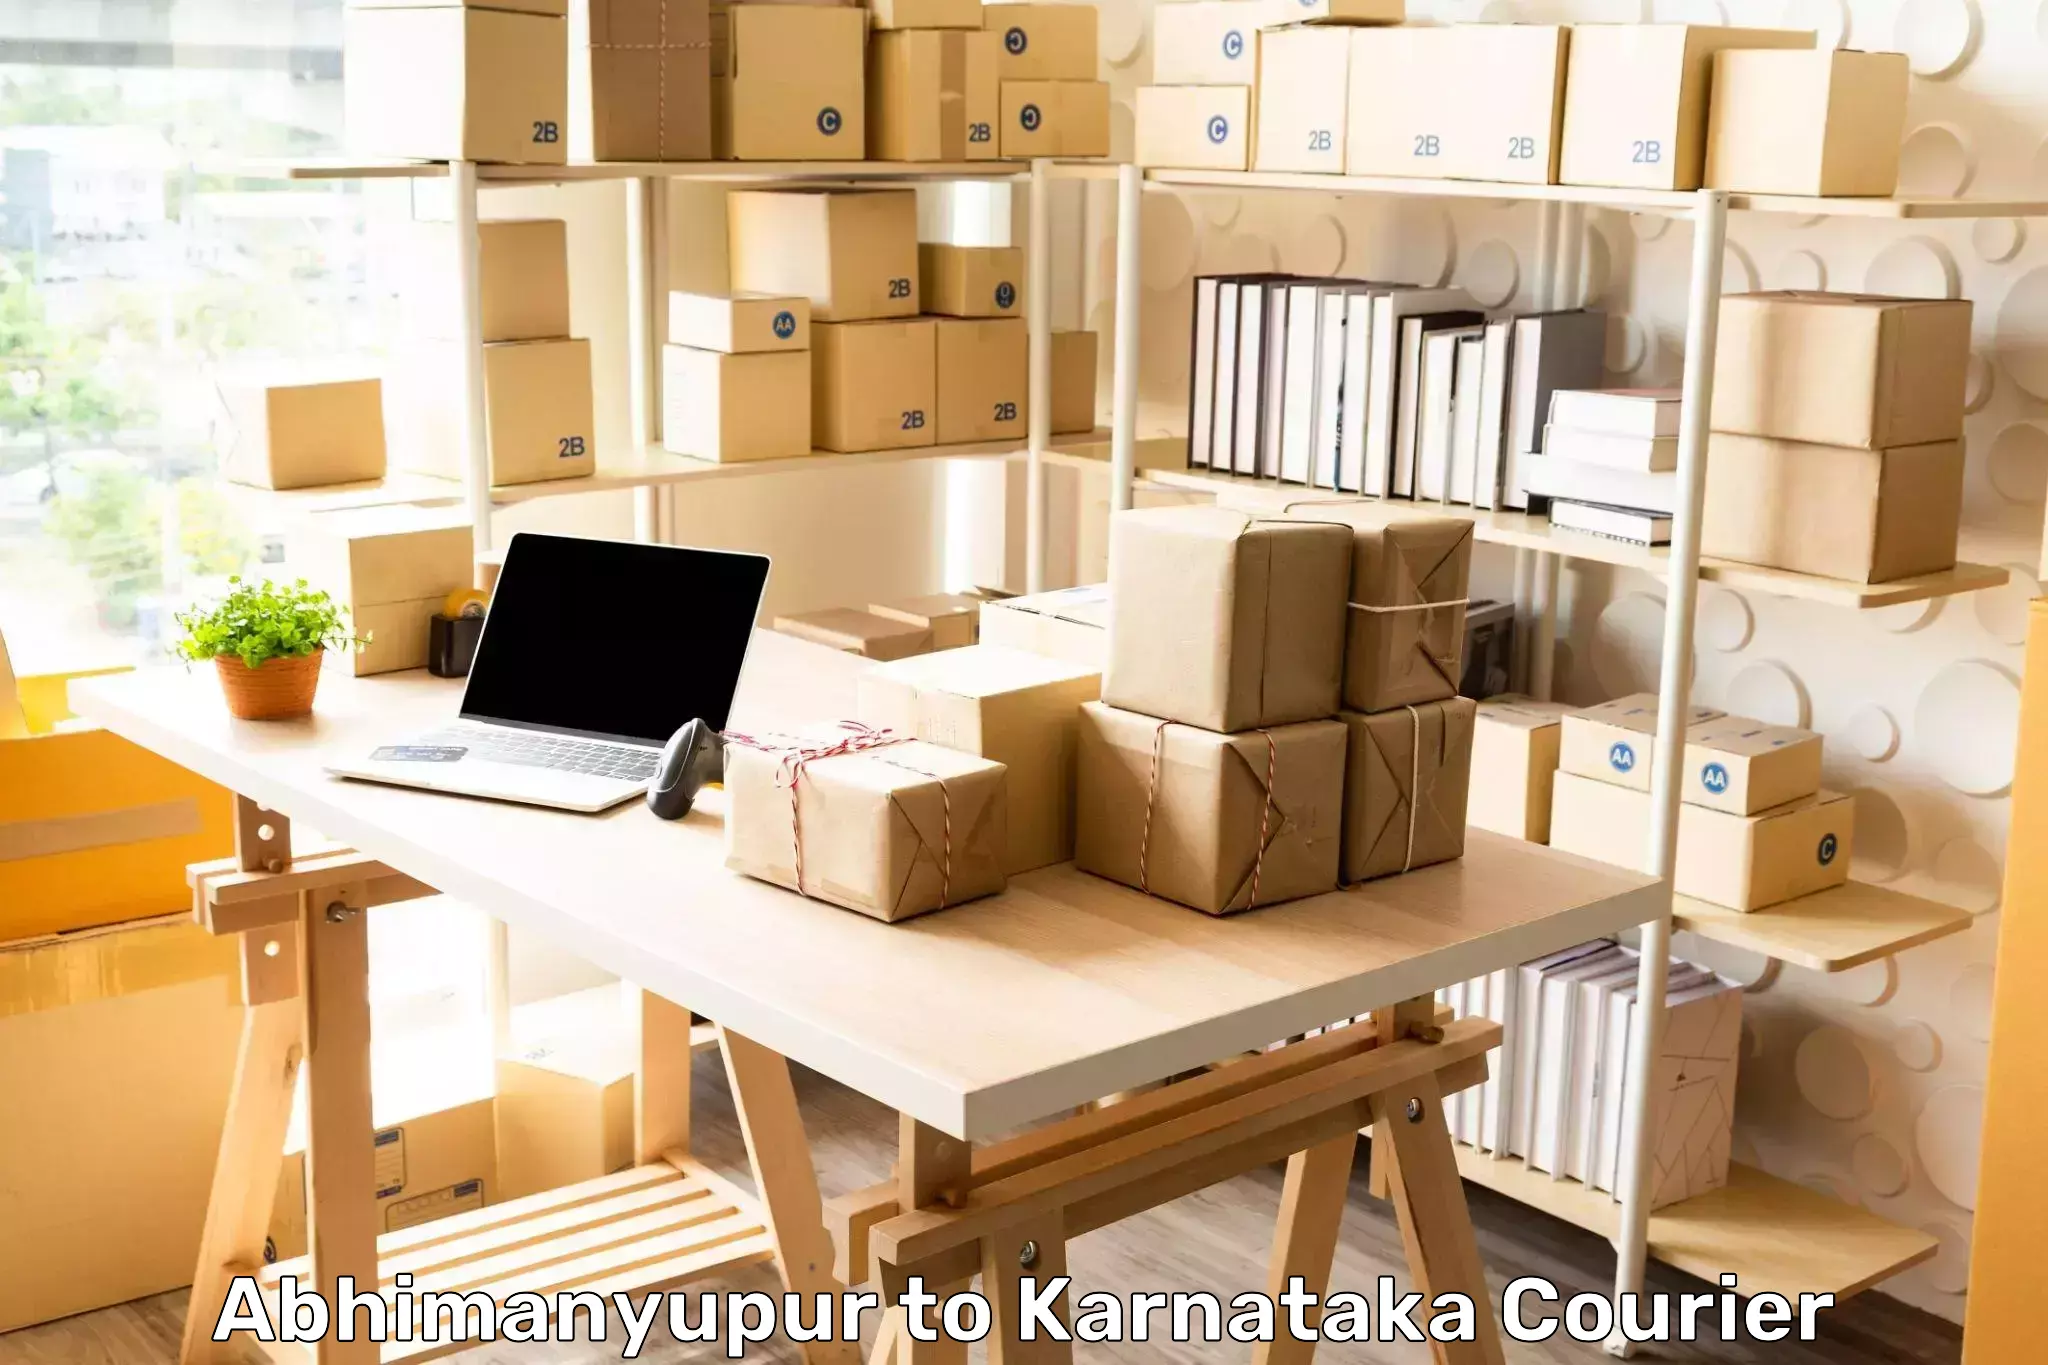 Quality courier services Abhimanyupur to Yelburga